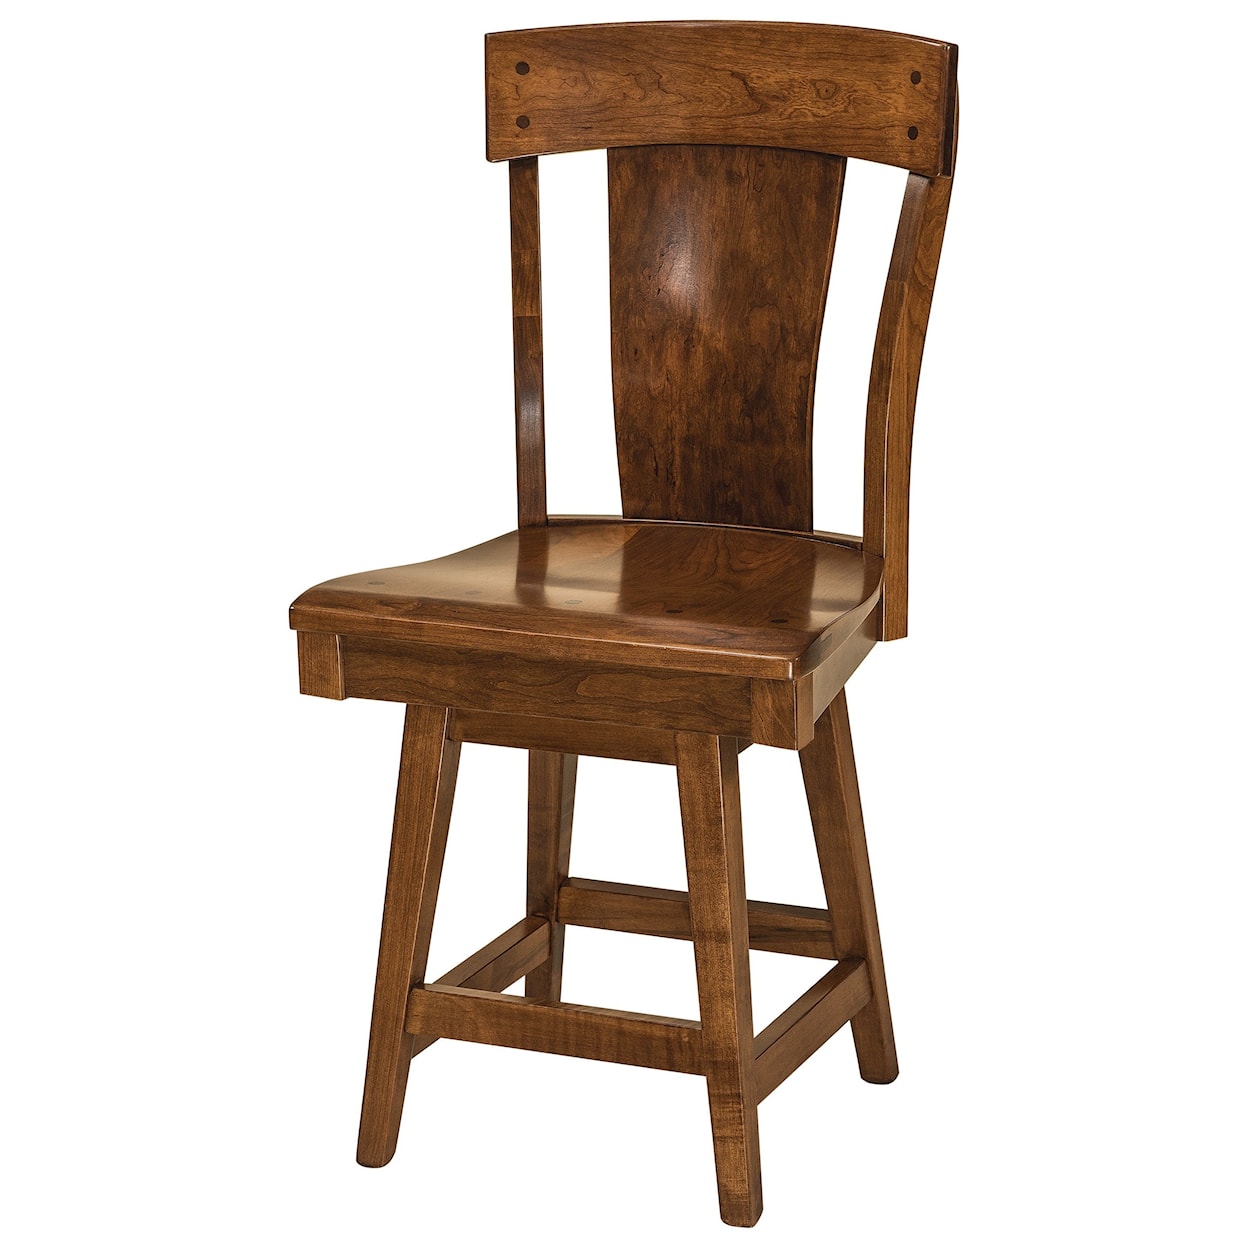 F&N Woodworking Lacombe Swivel Counter Height Stool - Leather Seat